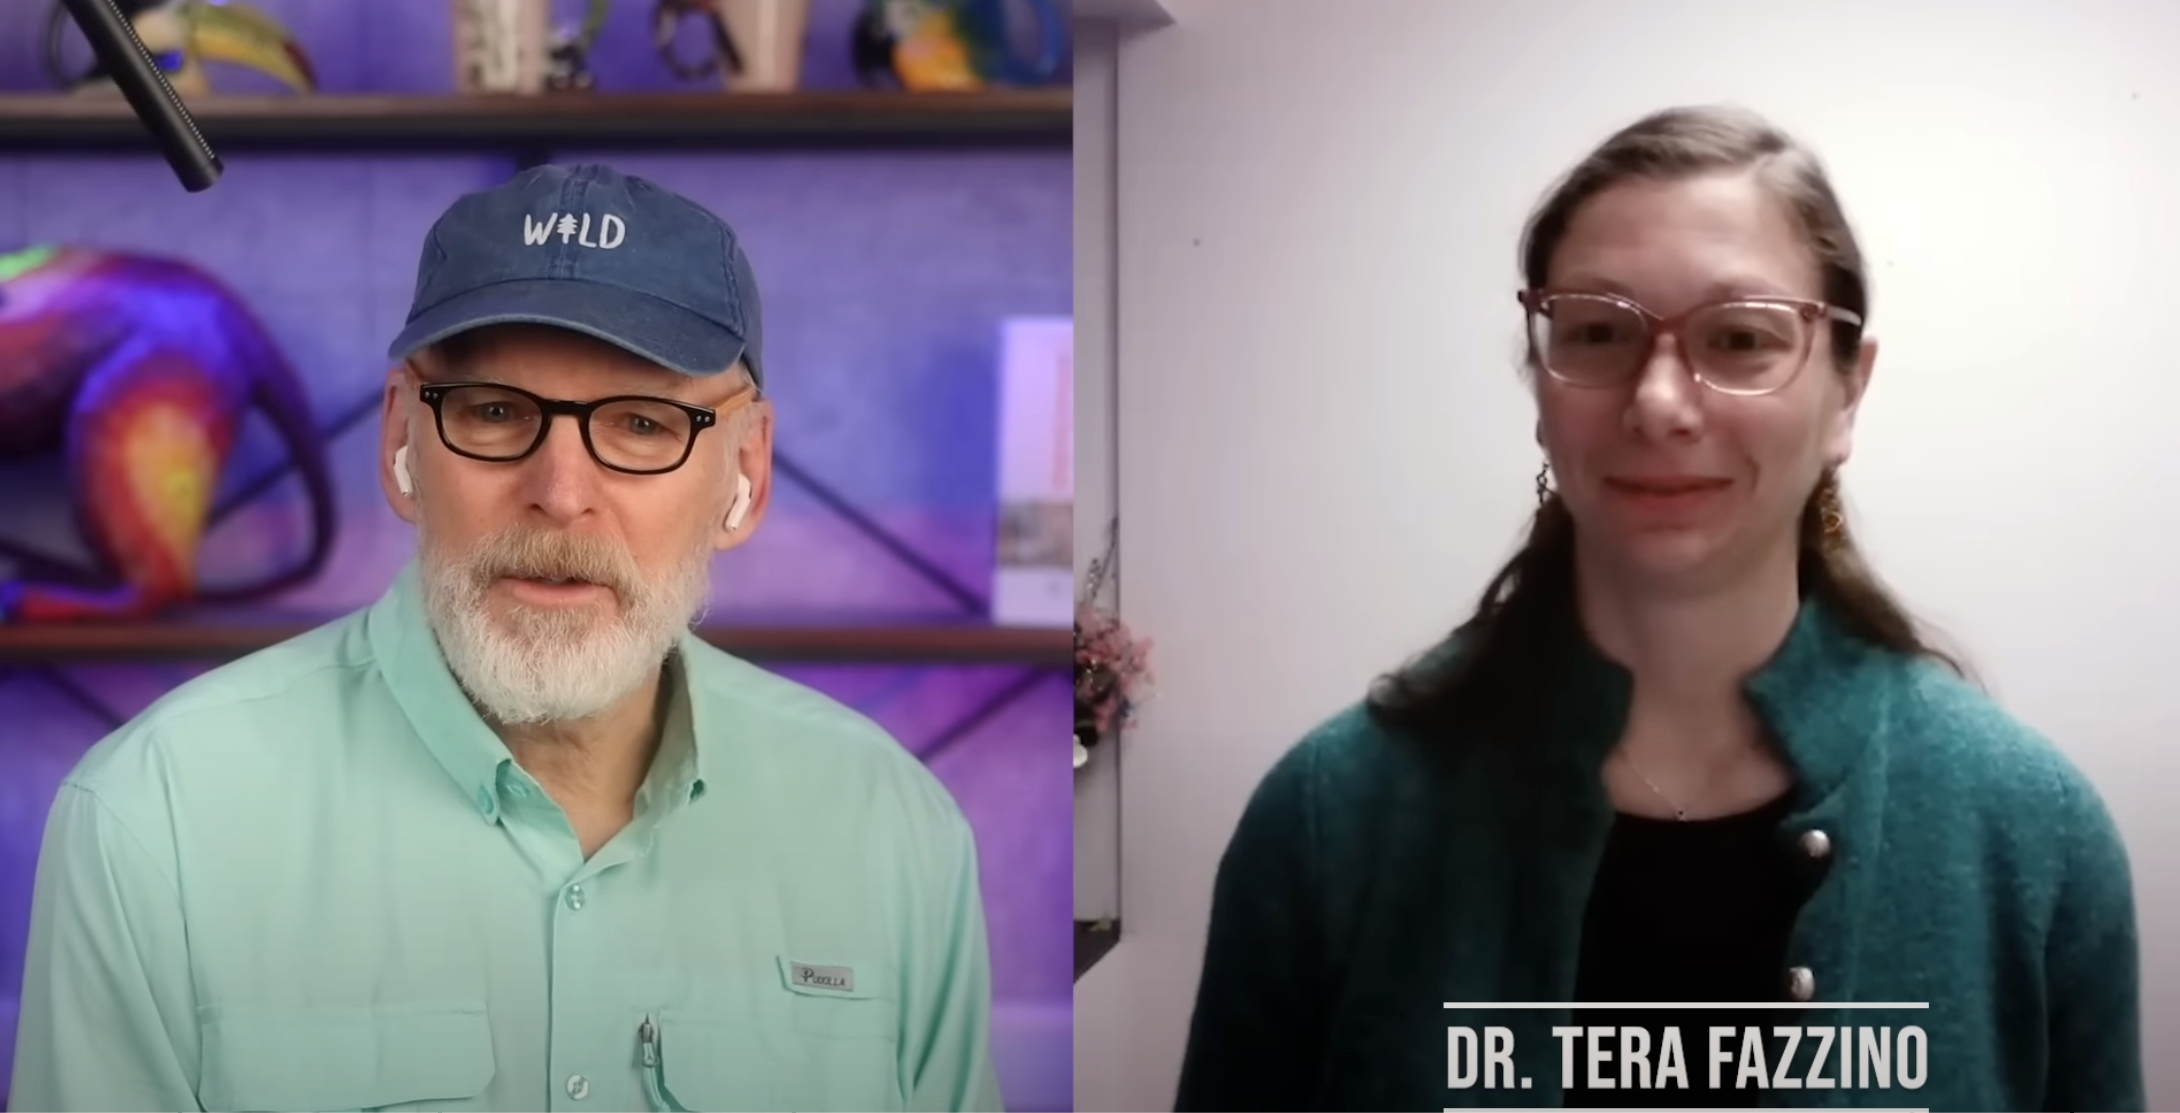 "An image shows a man with a white beard and a light green shirt wearing a denim blue cap with the word wild on it with a split screen image of a woman with a green sweater and the text "Dr. Tera Fazzino" at the bottom of the frame"